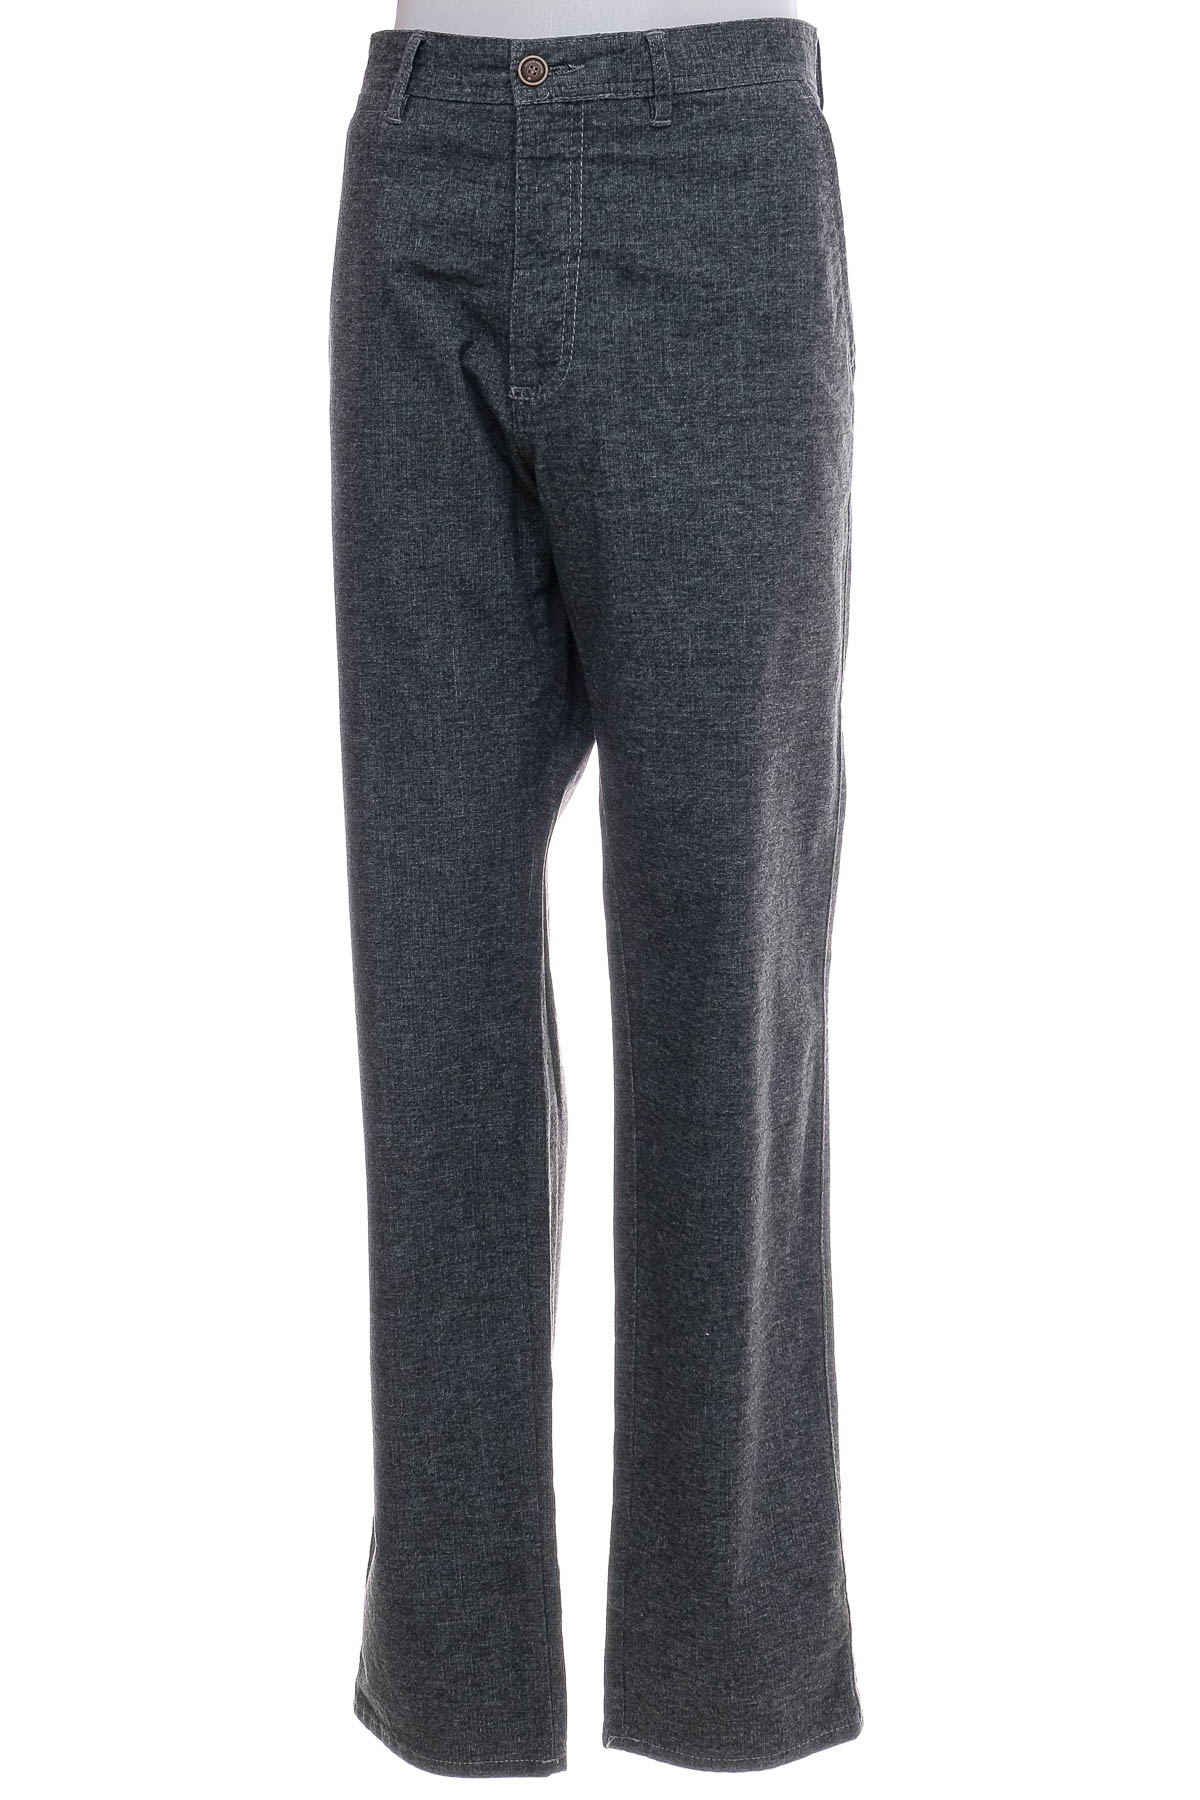 Men's trousers - Engbers - 0